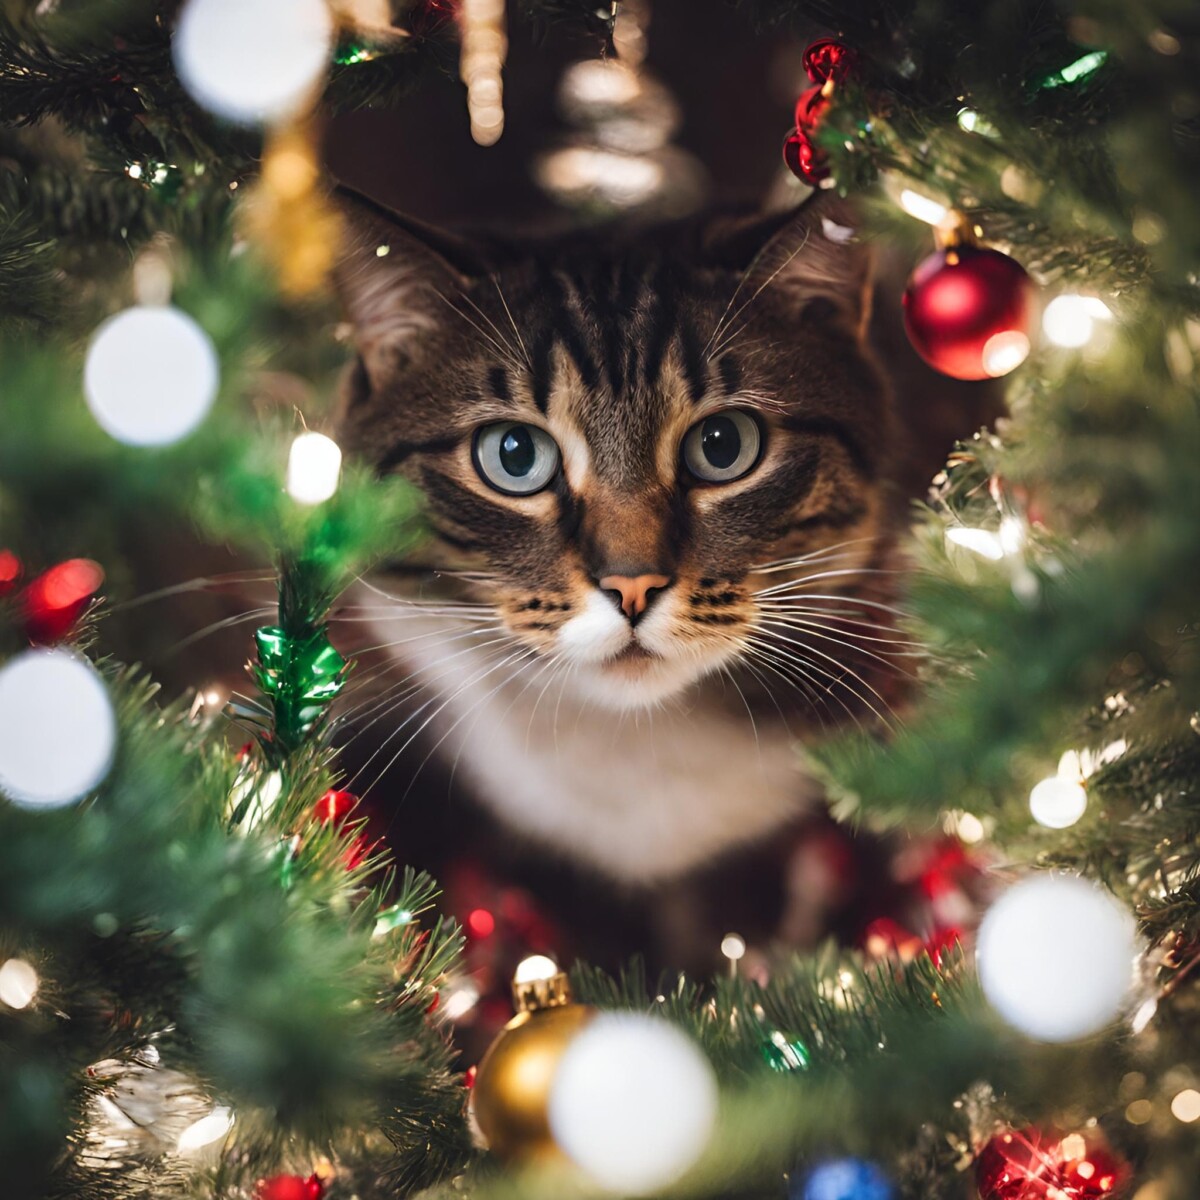 How To Keep Cat Out Of Christmas Tree